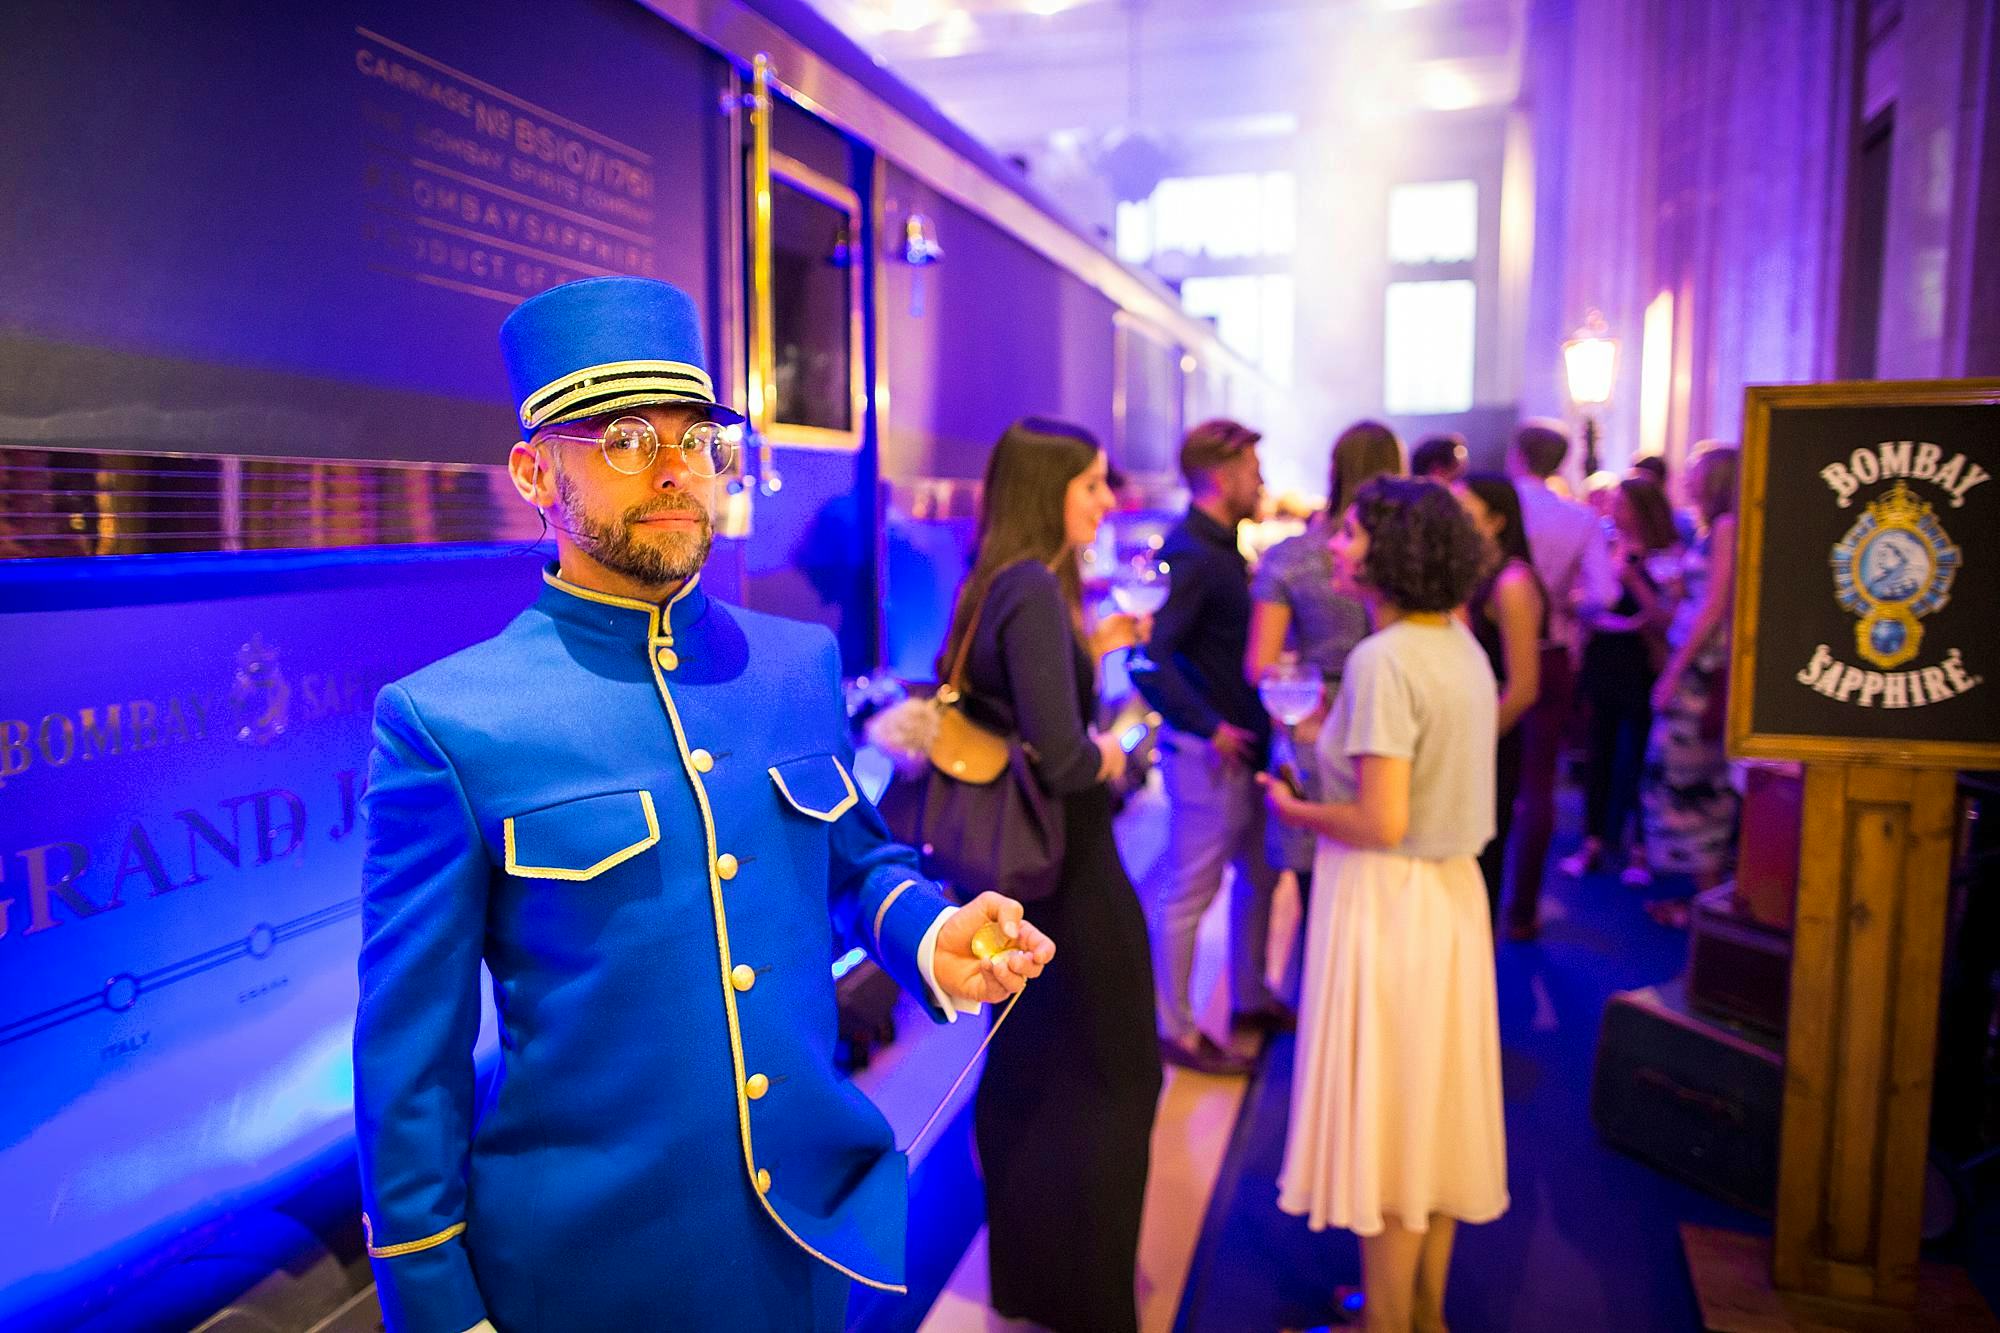 Bombay sapphire event The Grand Journey